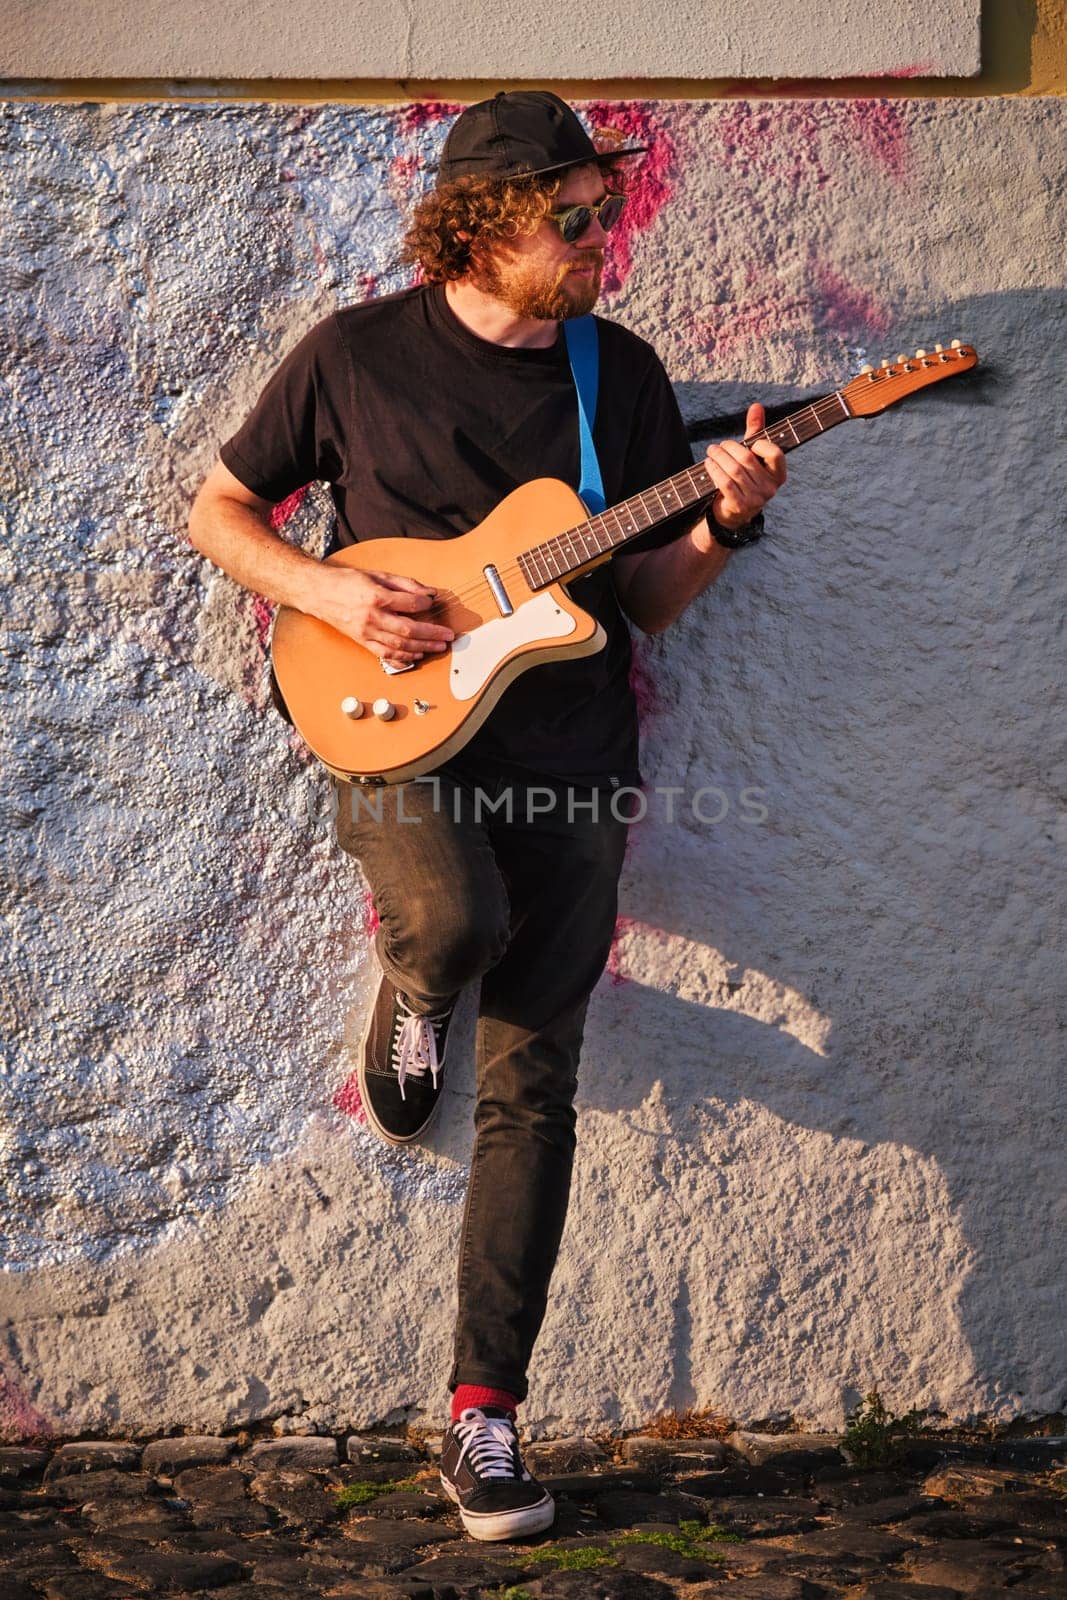 Hipster street musician in black playing electric guitar in the street on sunset leaning on a wall